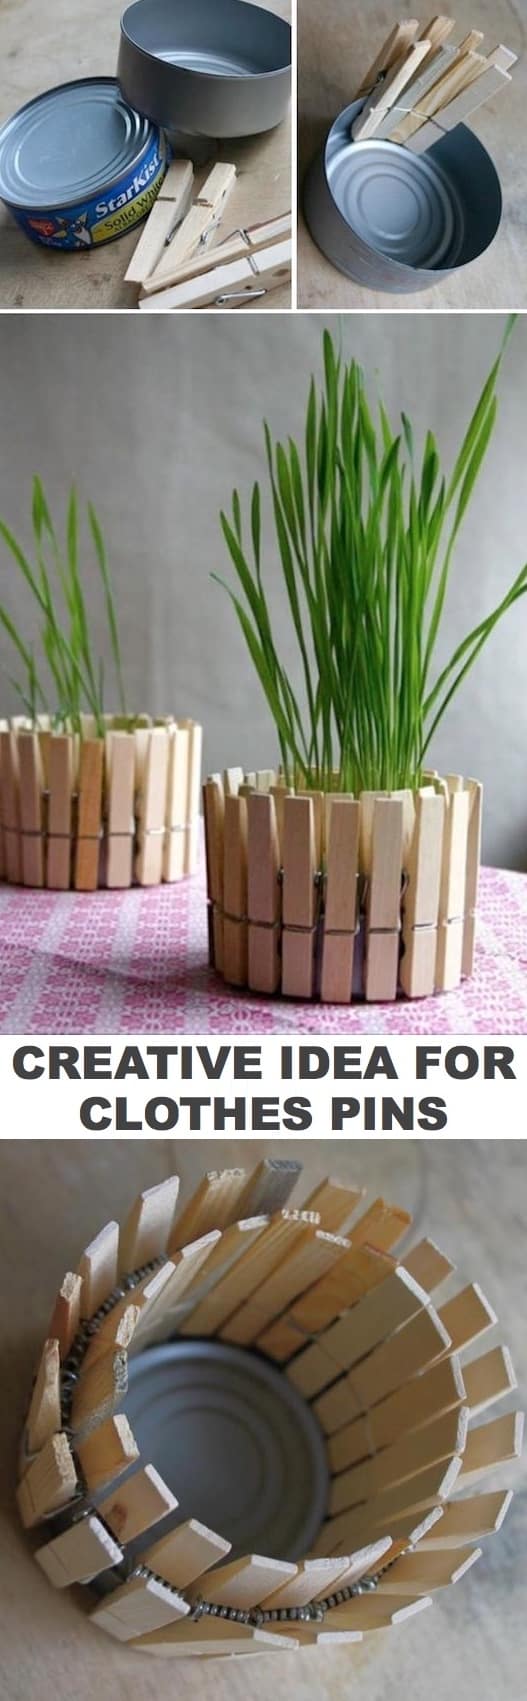 Craft Ideas for Adults That Will Spark Your Creativity